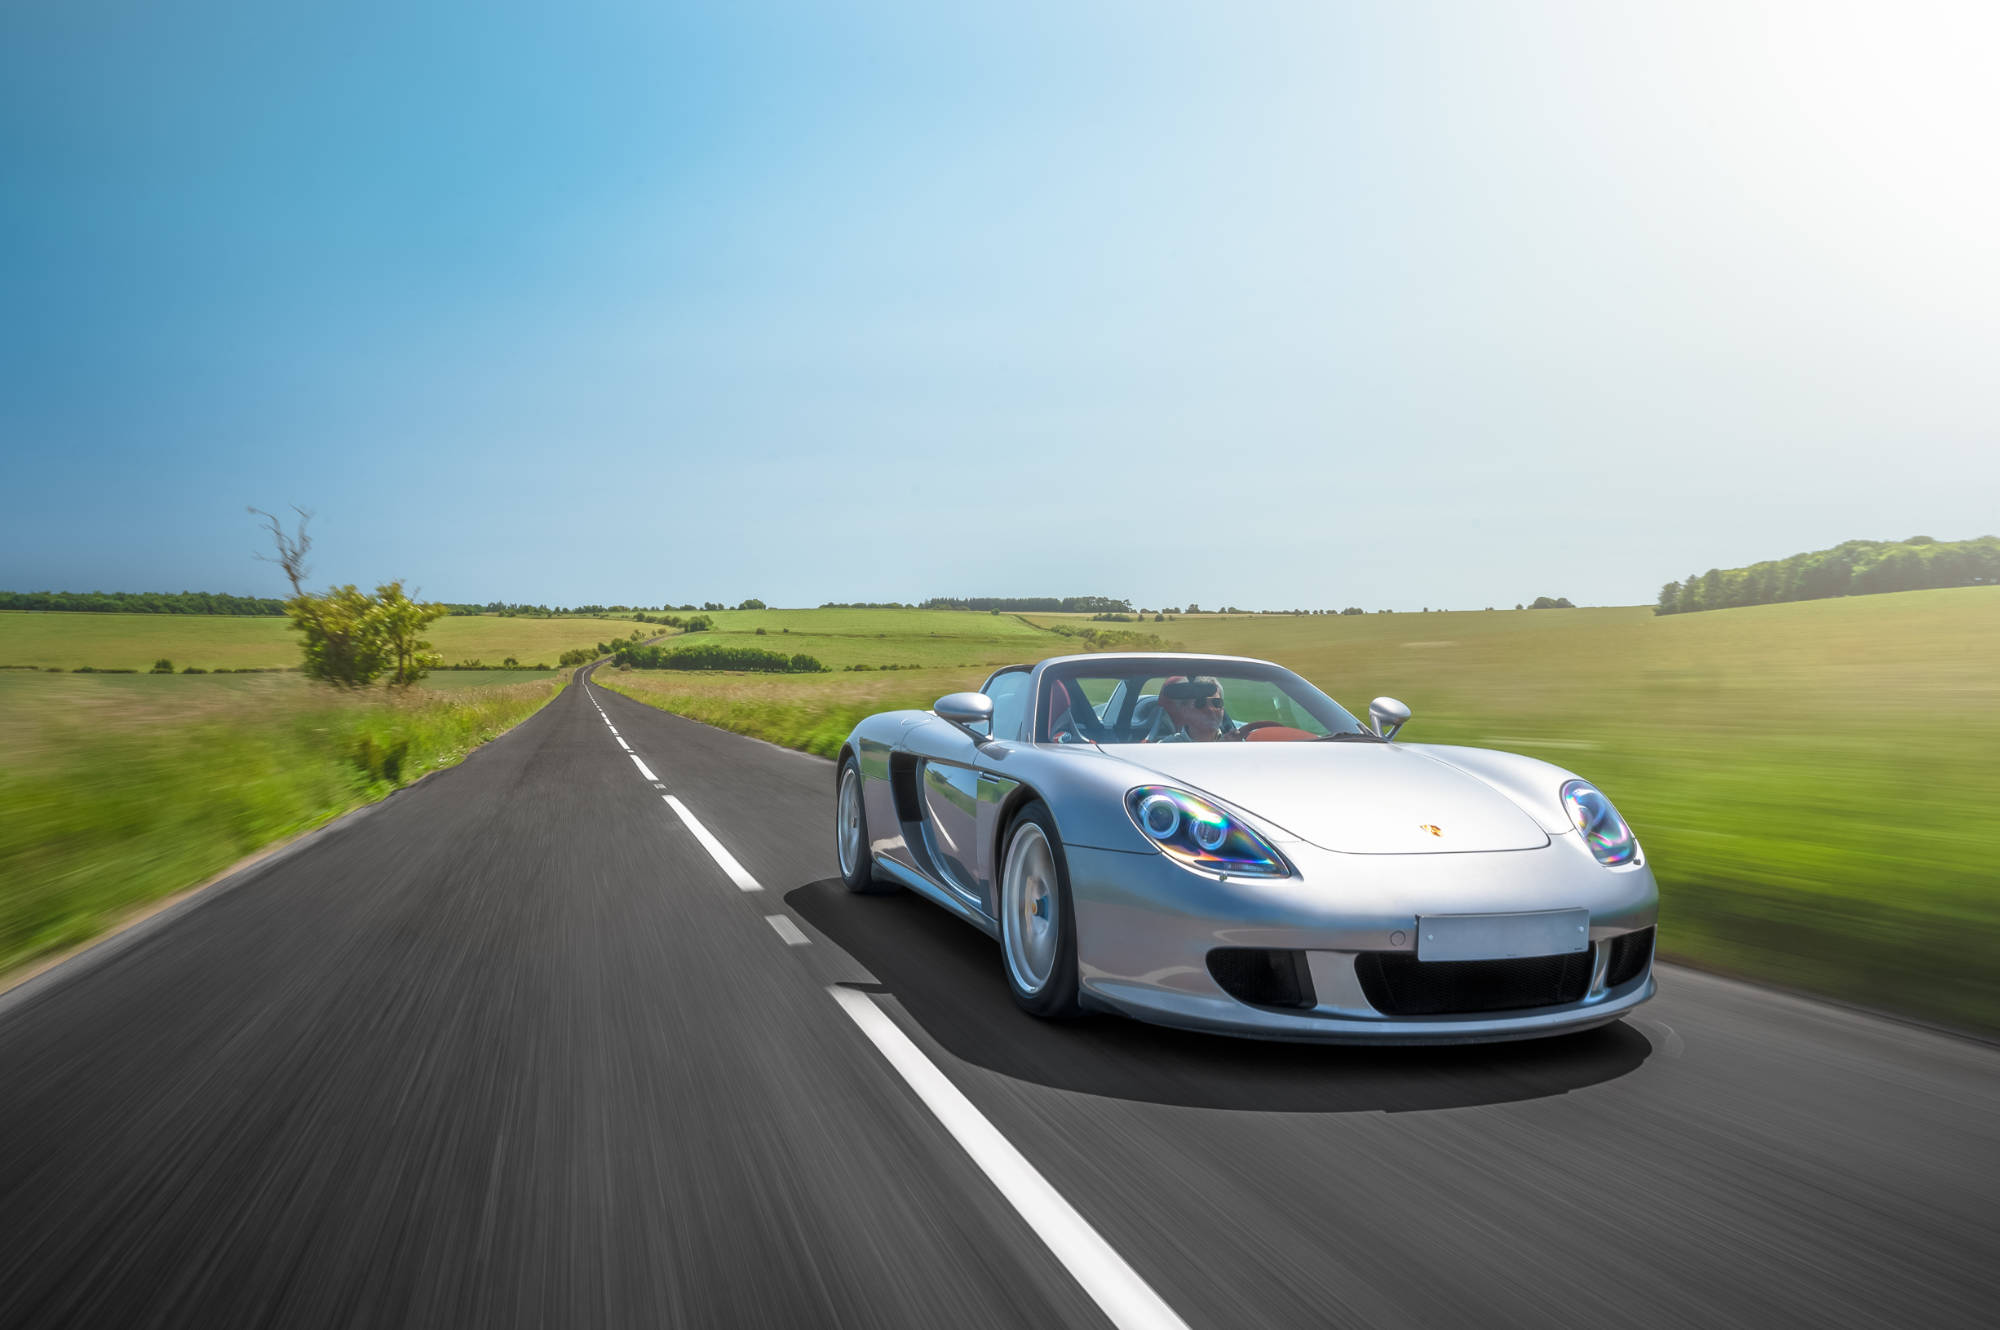 Silver Carrera GT on a country road